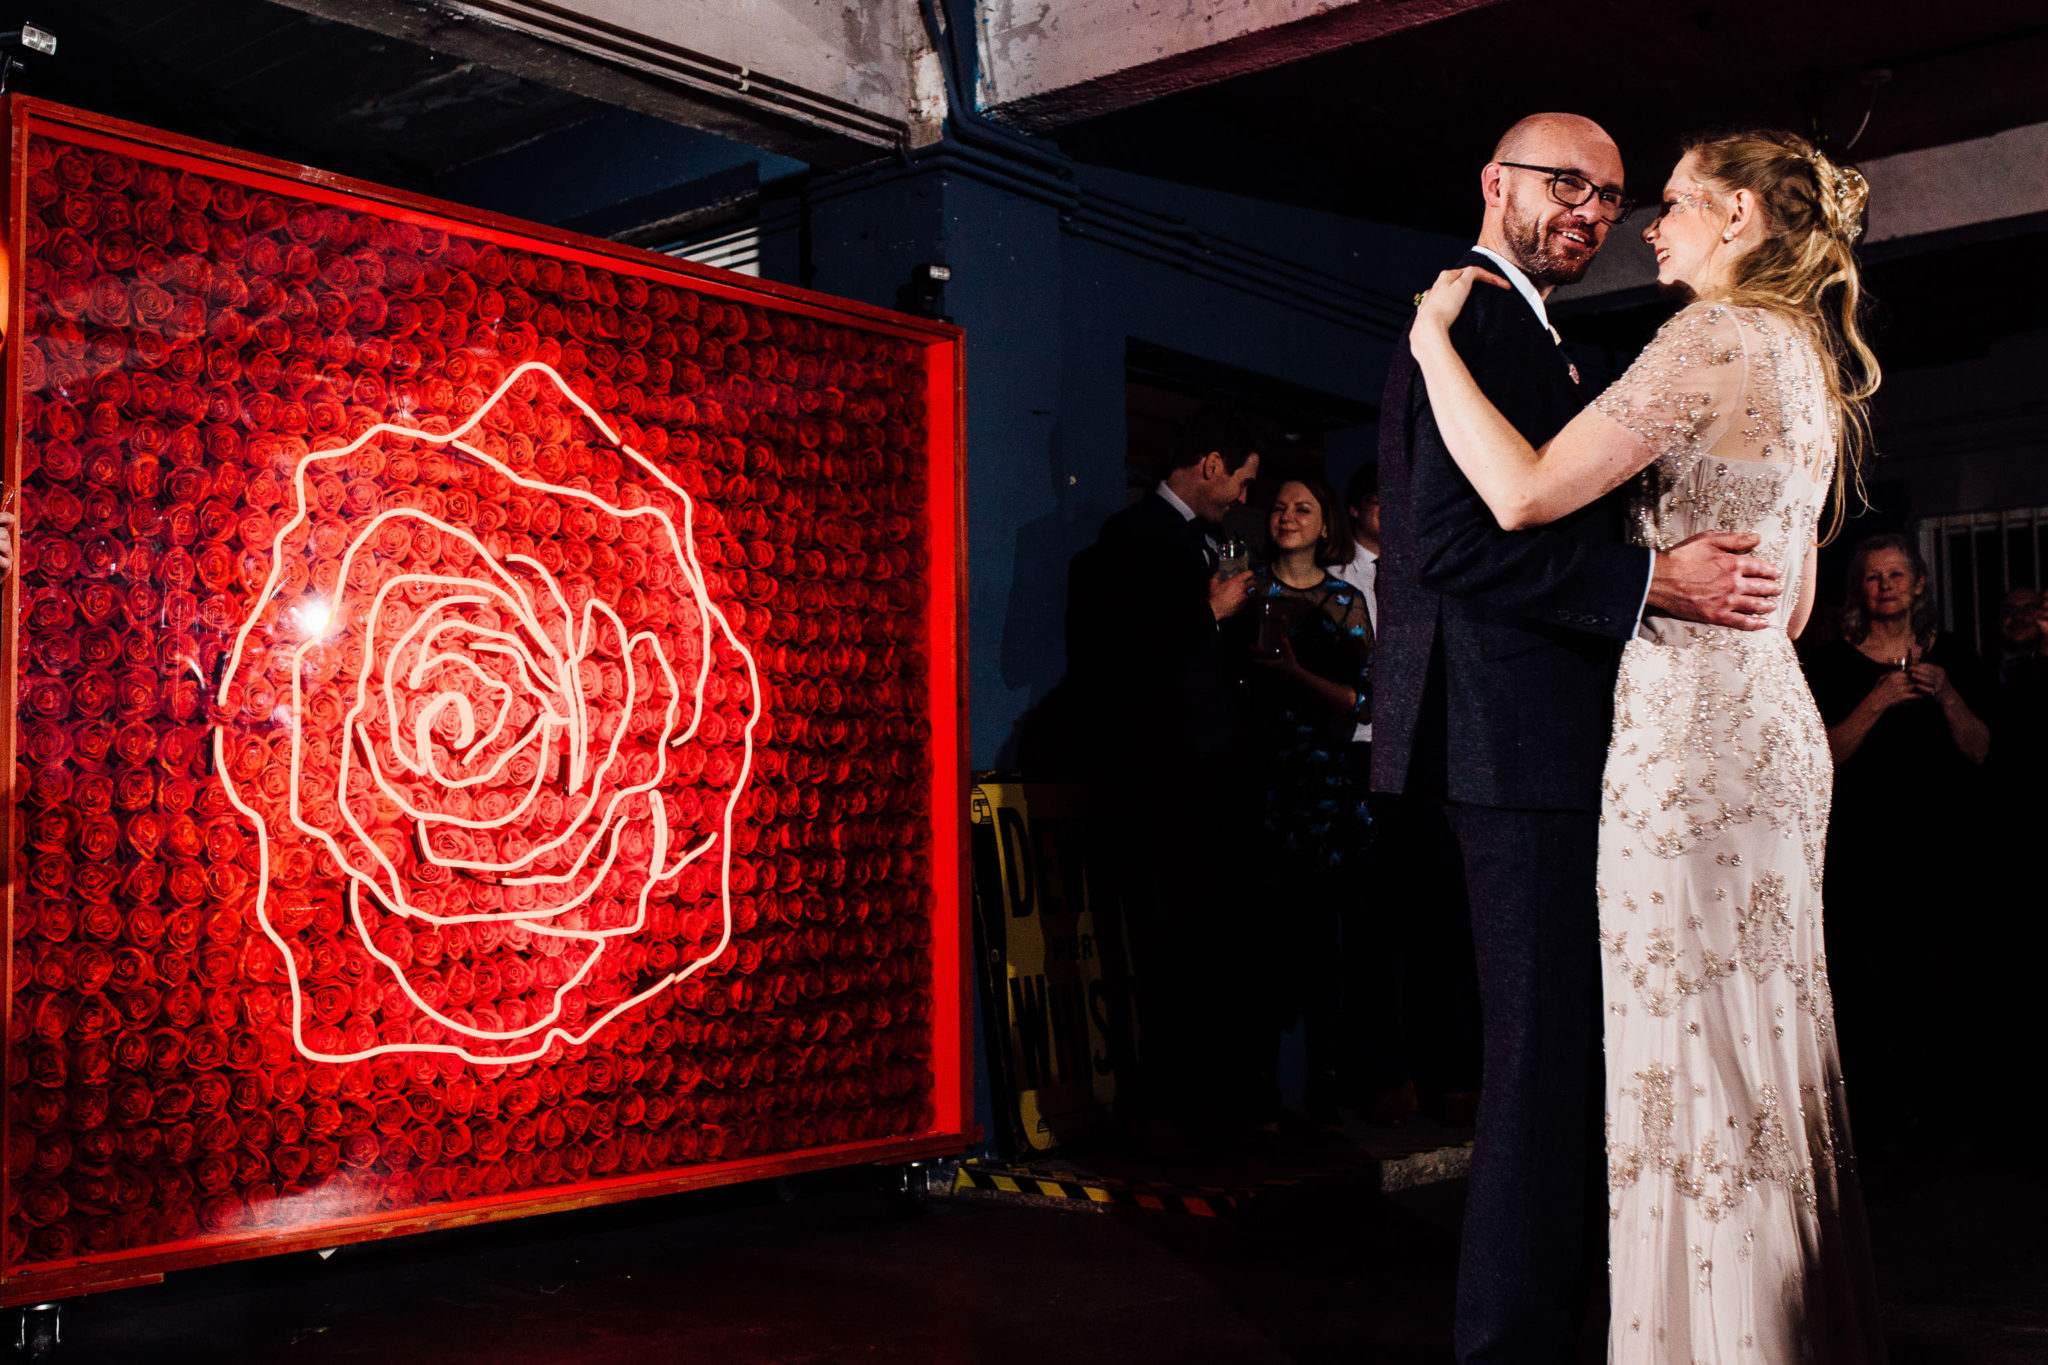 DANCE CANDIDS AT WAREHOUSE WEDDING AT ONE FRIENDLY PLACE LONDON DOCUMENTARY FUN WEDDING PHOTOGRAPHY NEON ROSE